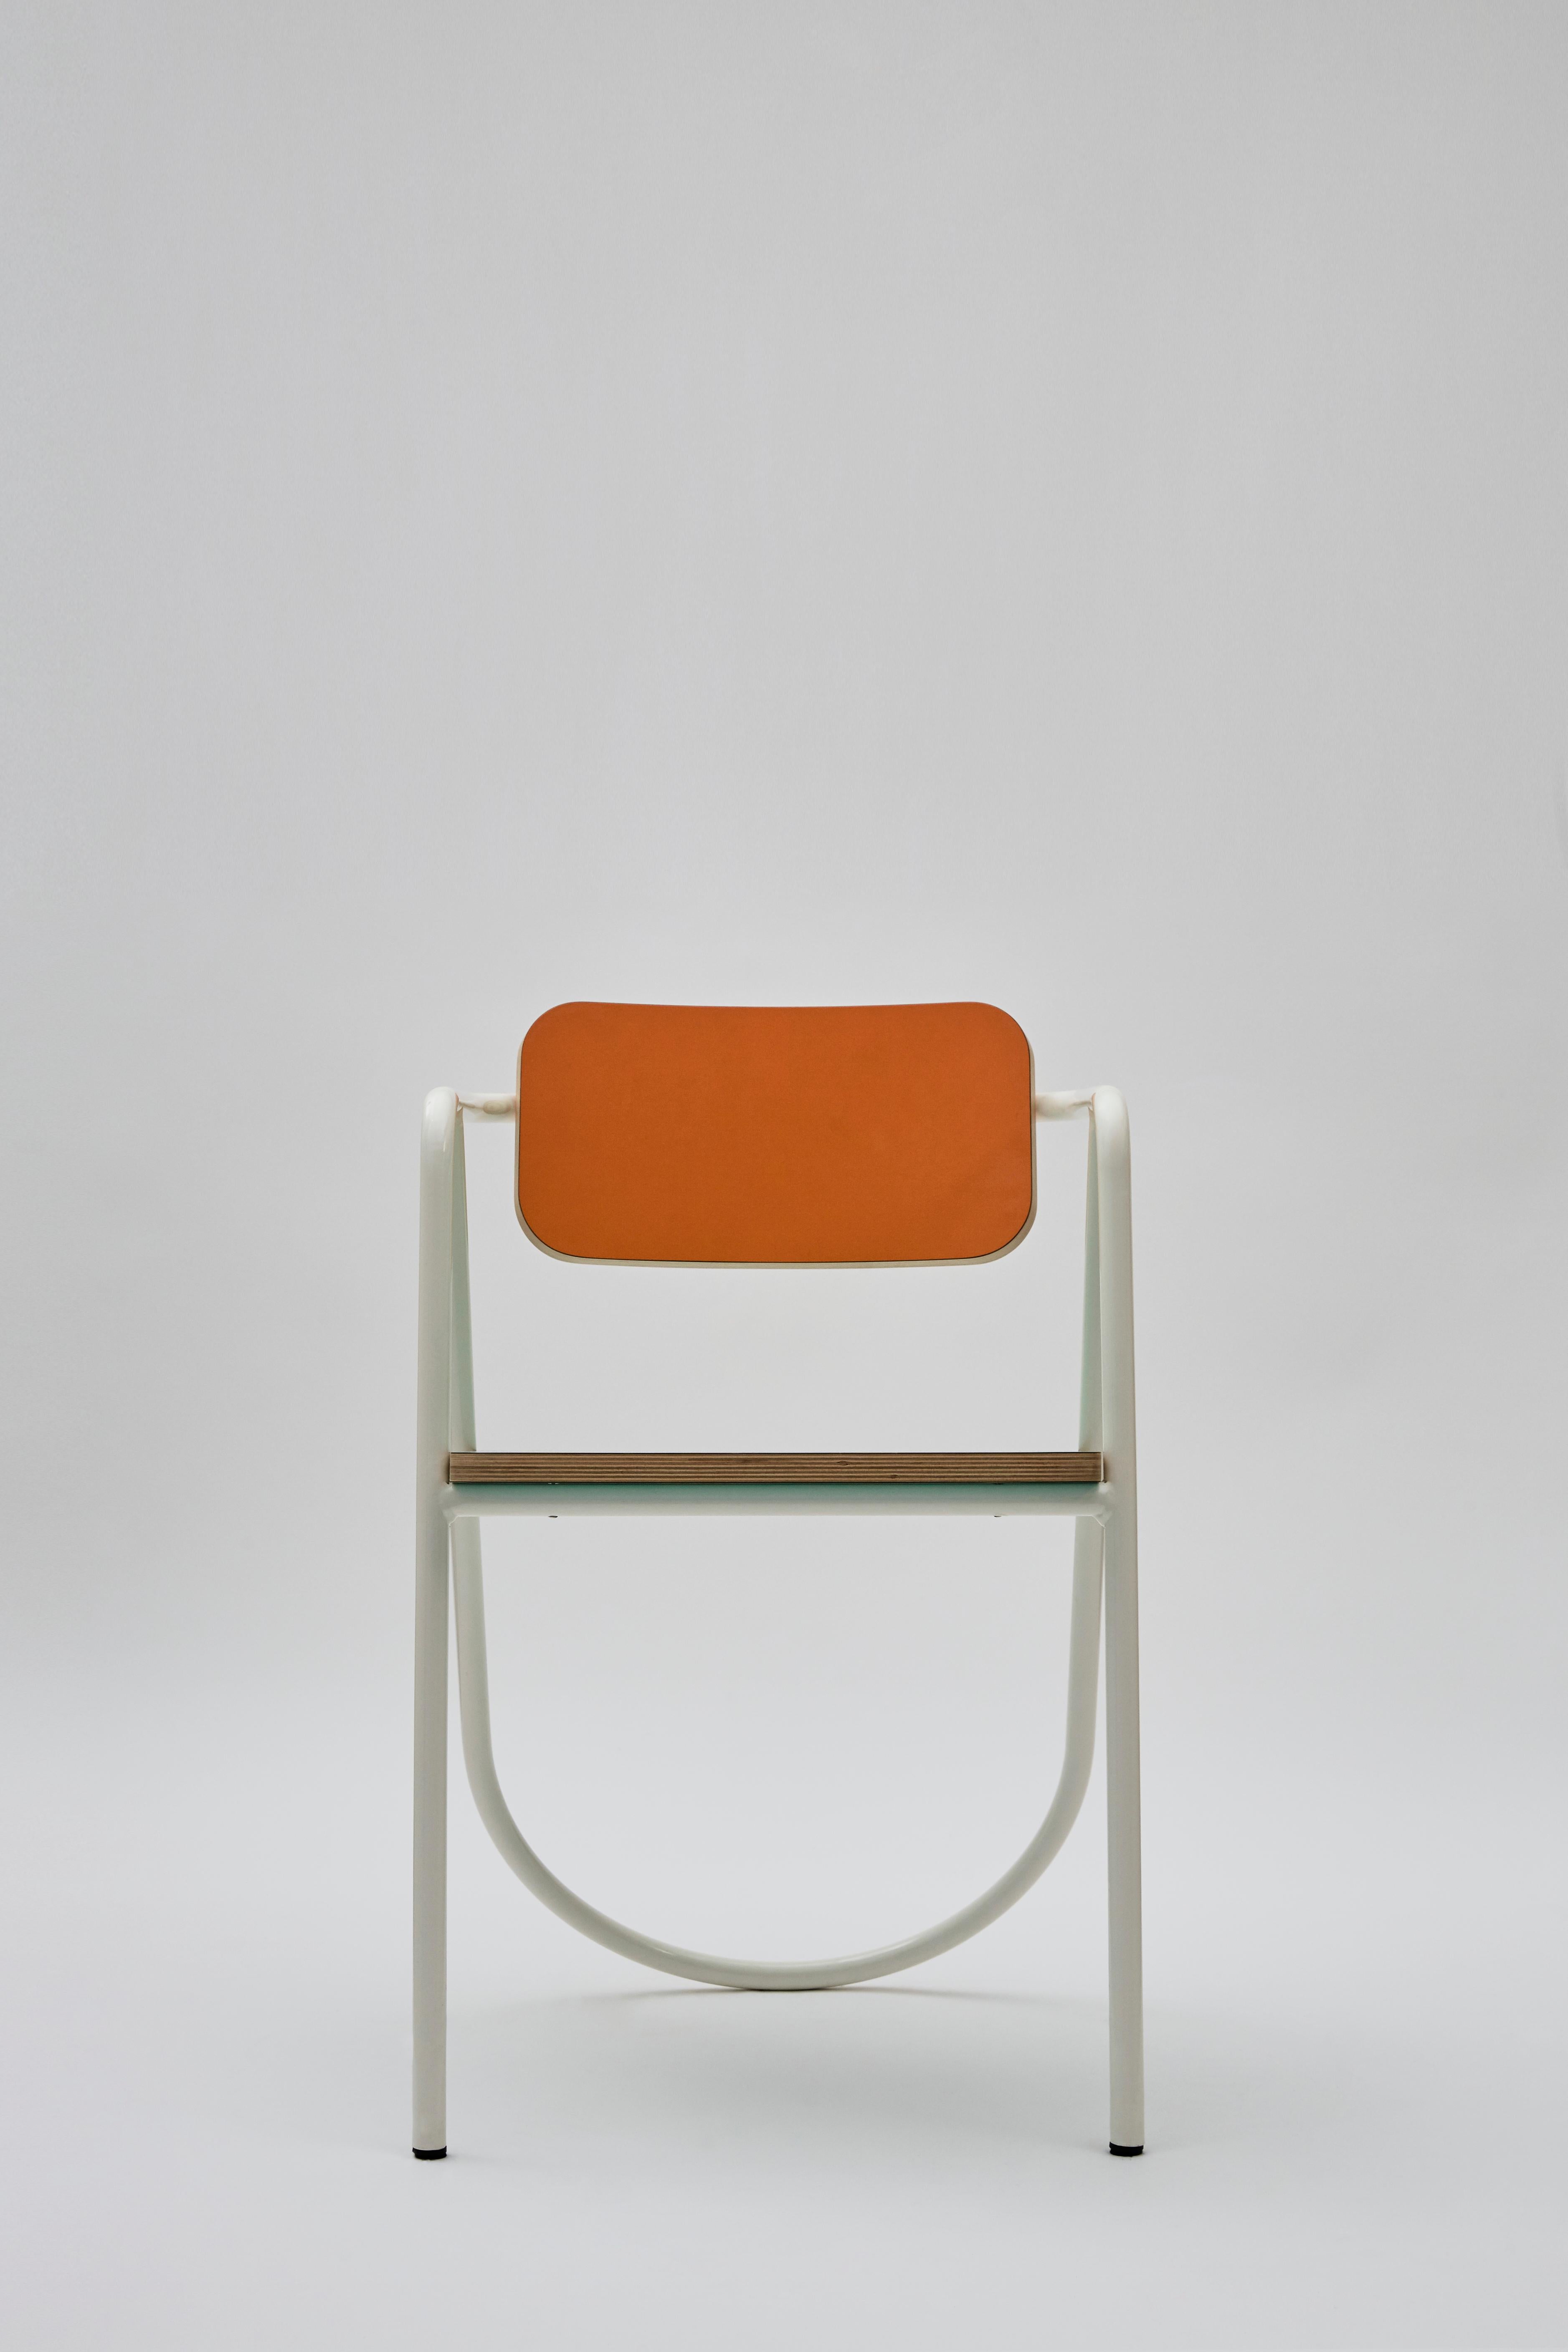 This splendid chair from La Misciù Collection reveals a strong vintage inspiration in its chromatic palette of white, orange, and teal. Boasting an airy cylindrical frame in white-lacquered steel tracing dynamic profiles, the design is completed by